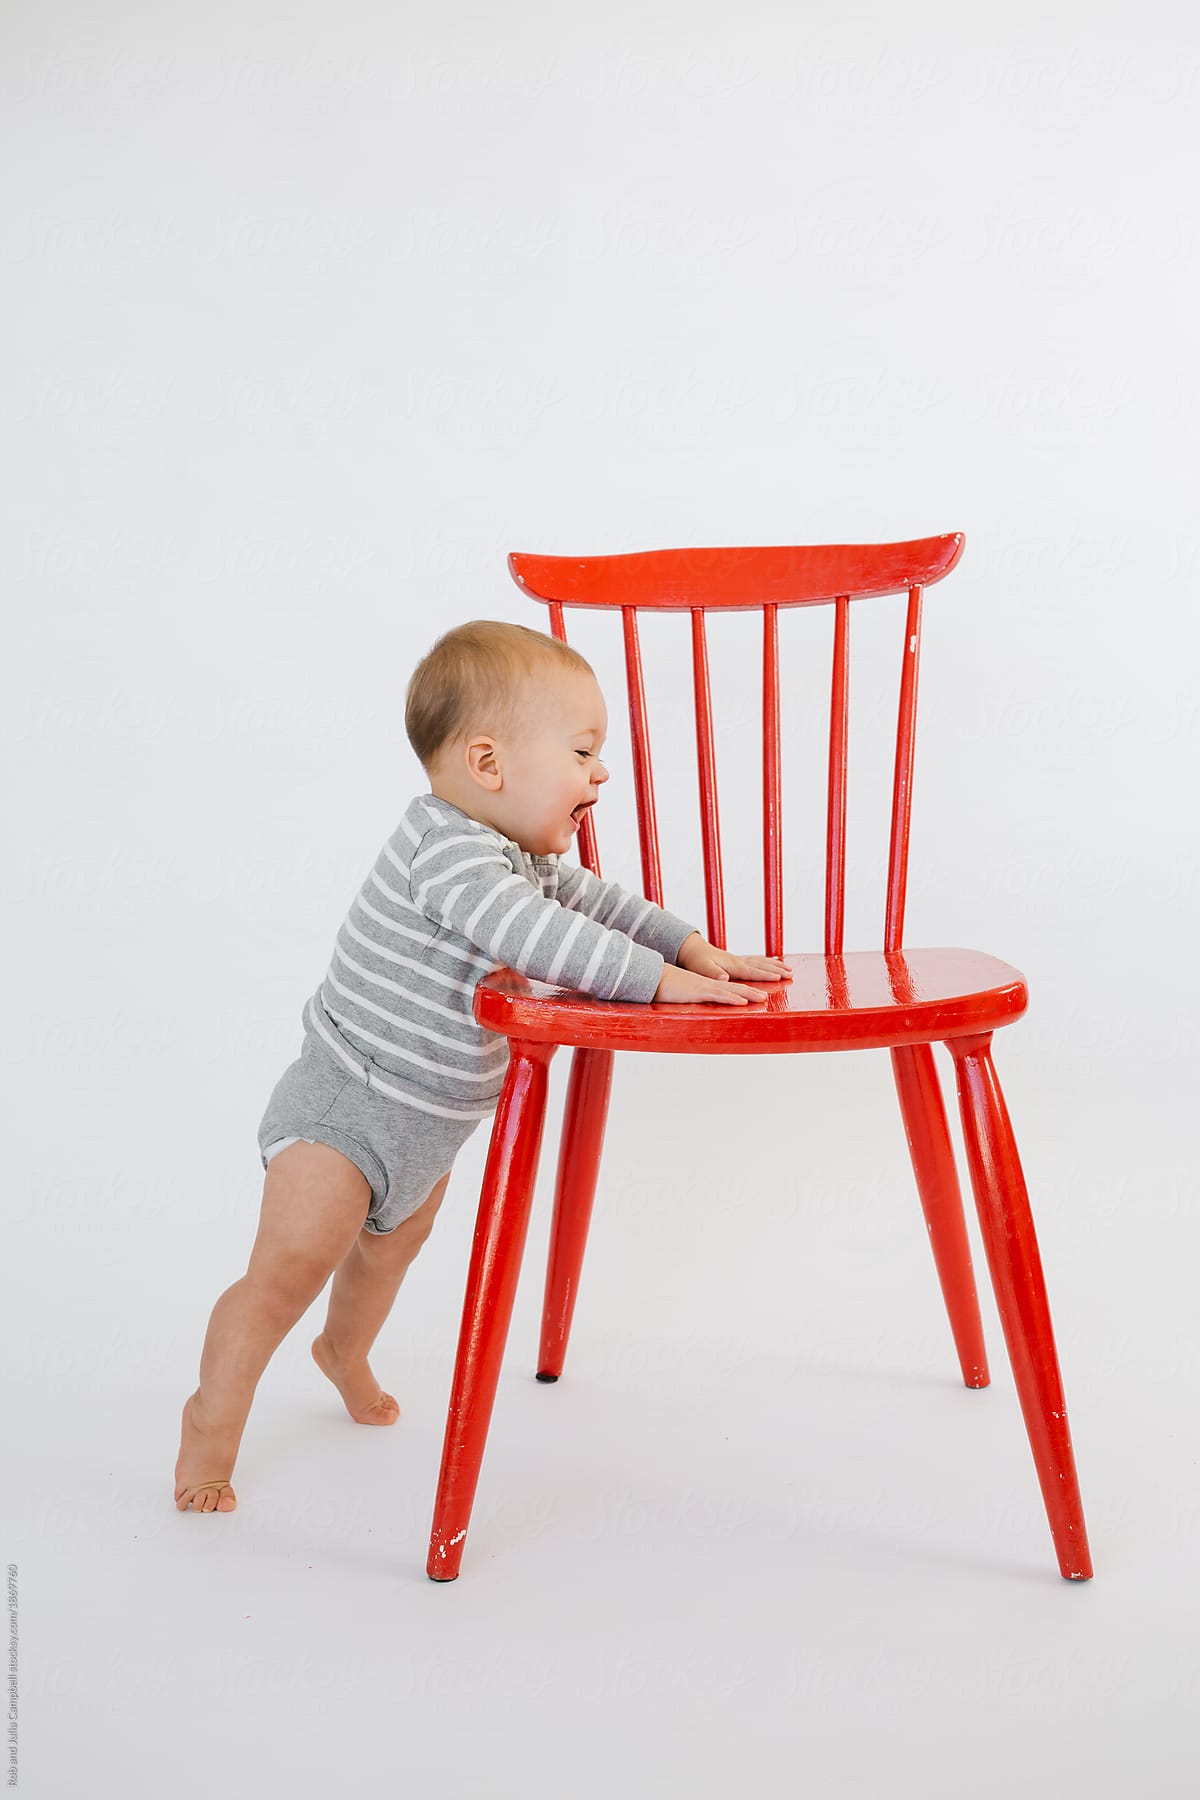 Cute baby standing up with red chair on 